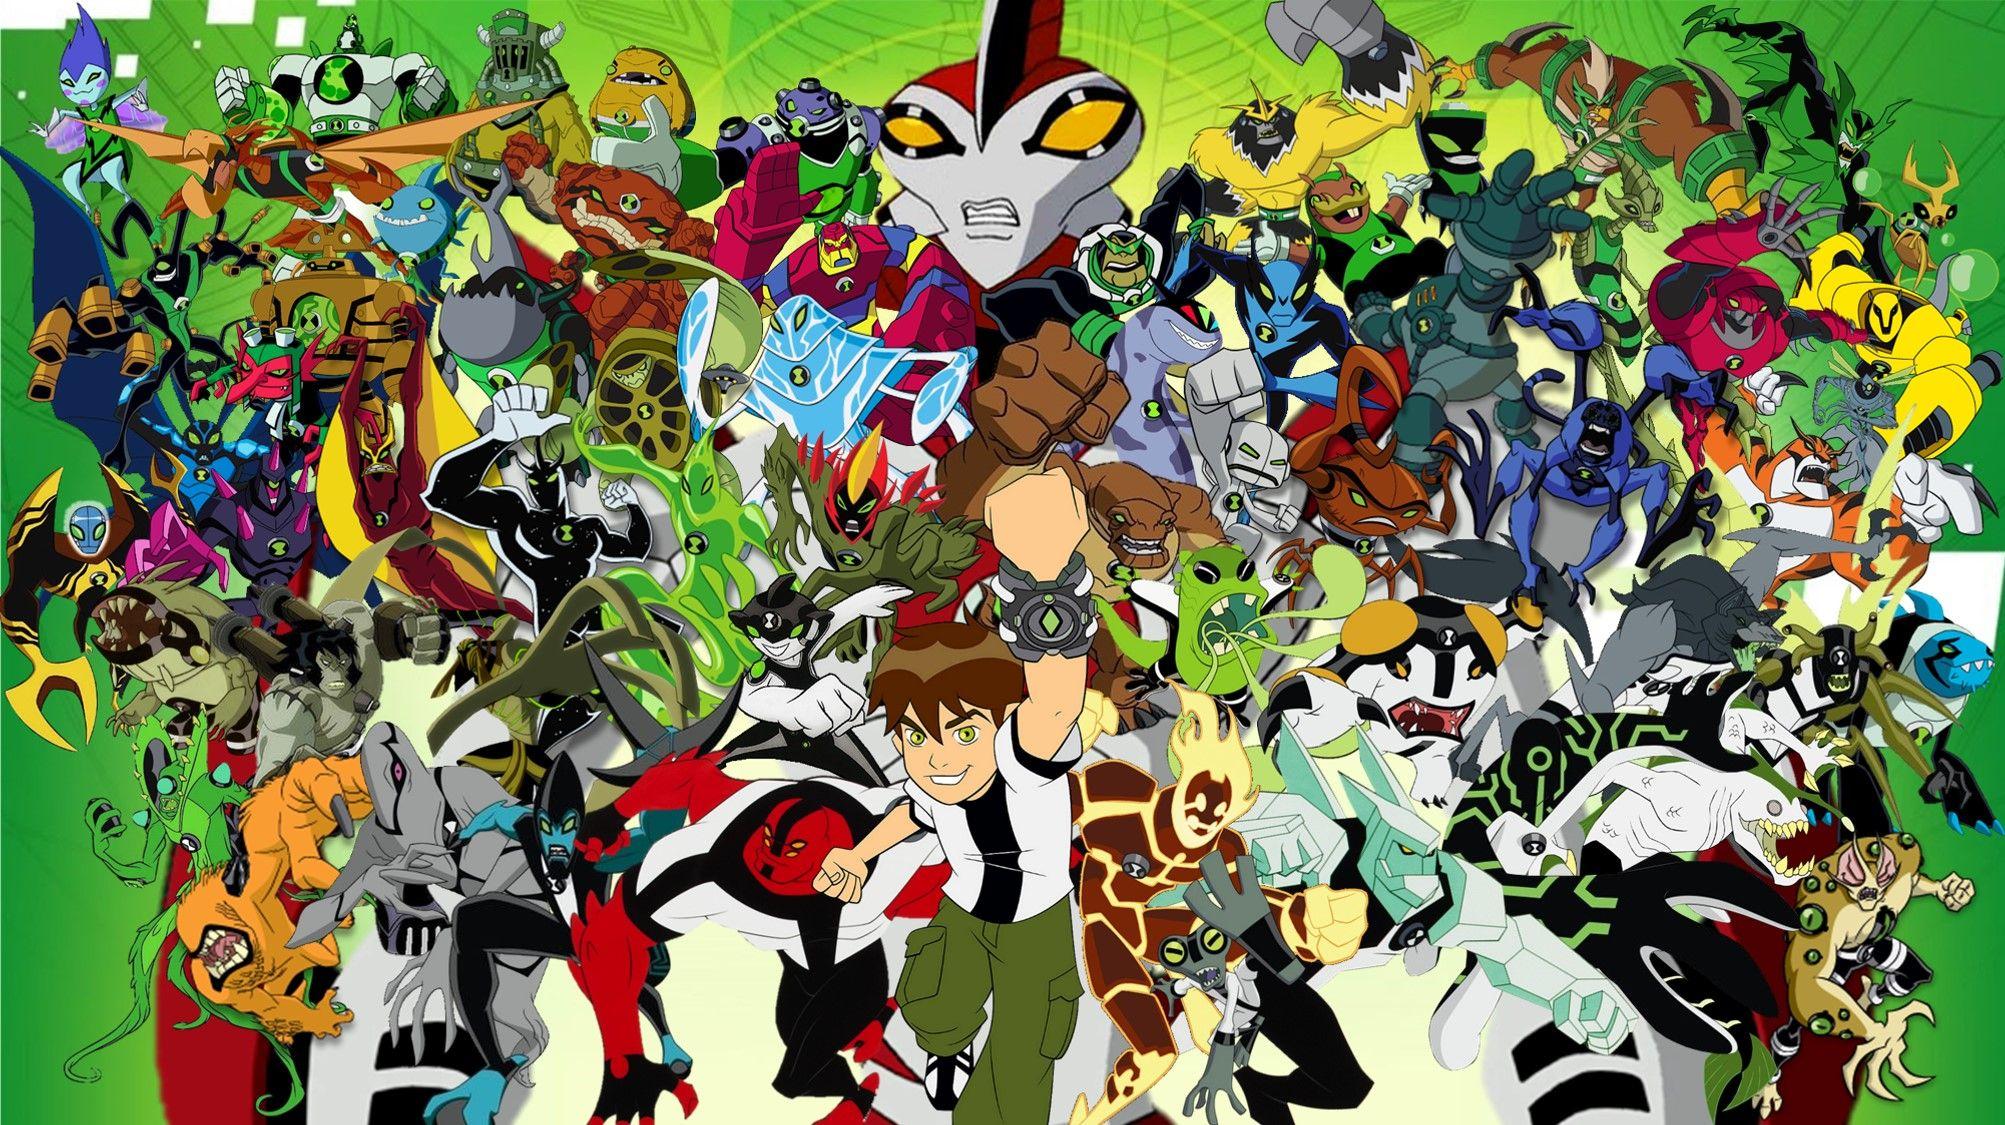 A Ben 10 wallpaper I made, featuring Ben and his 62 transformations